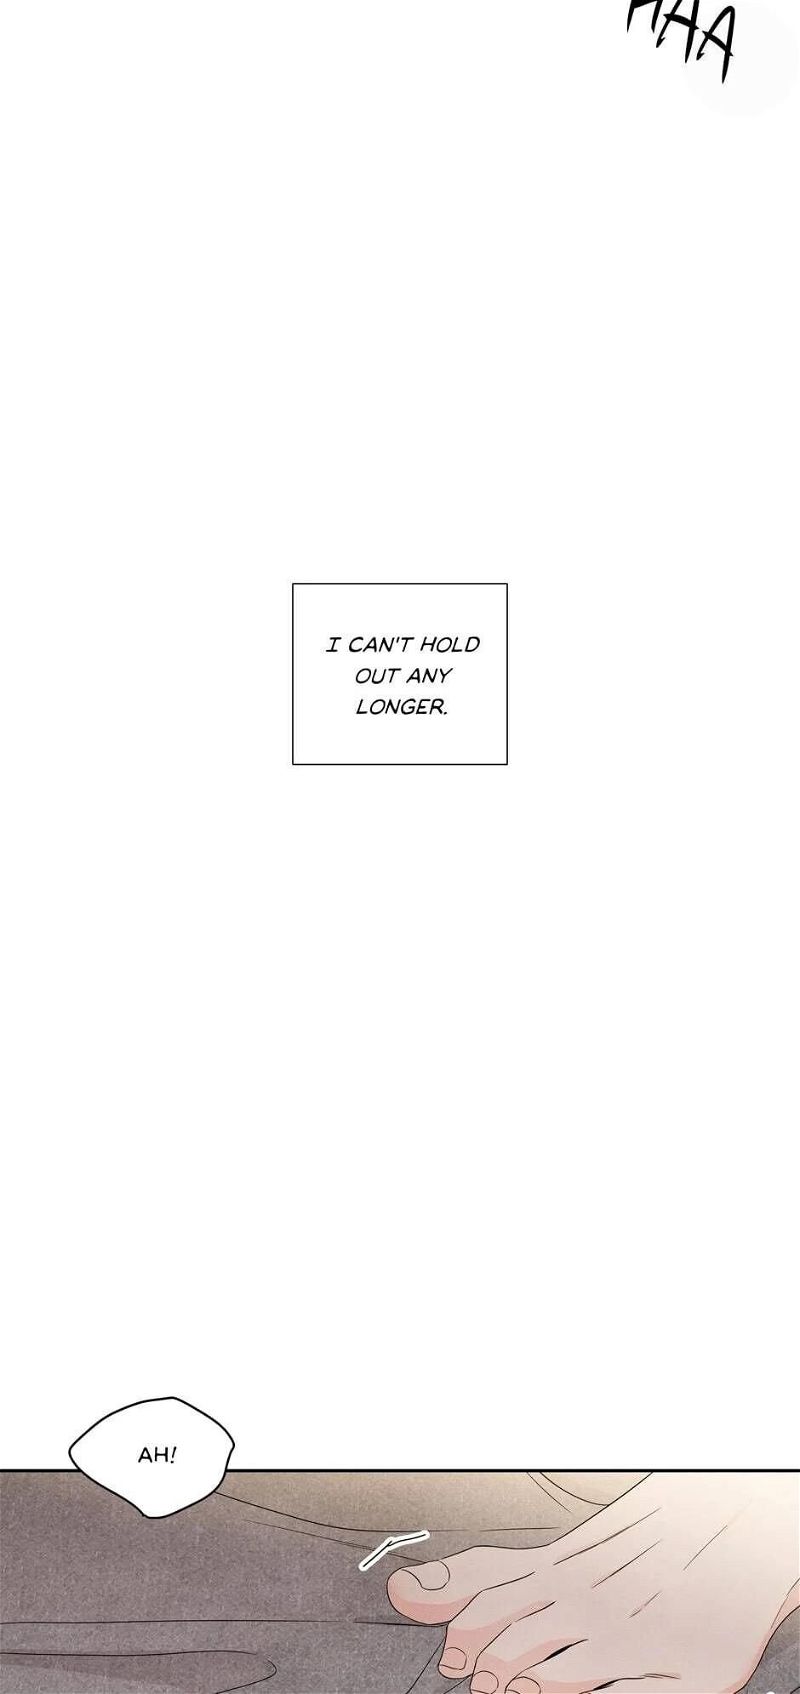 I want to do it, even if it hurts Chapter 63 page 26